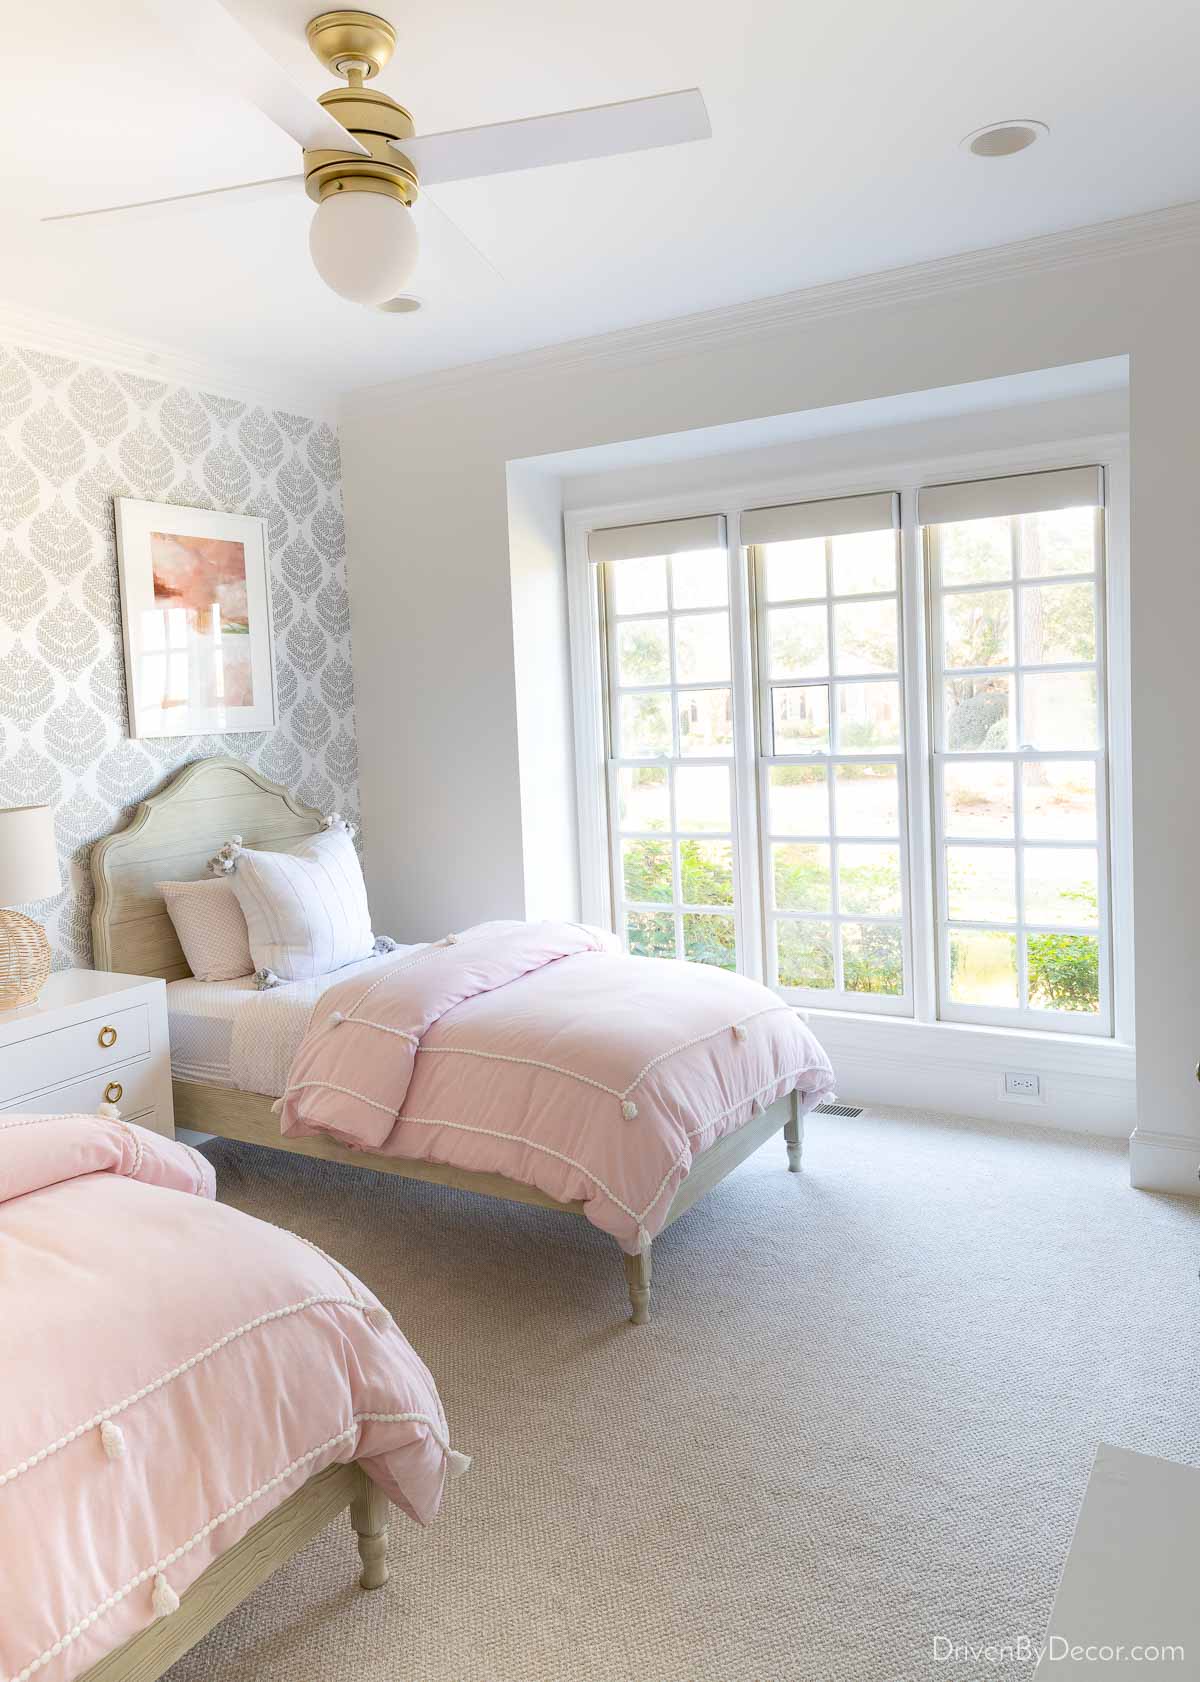 Girls' bedroom with twin beds